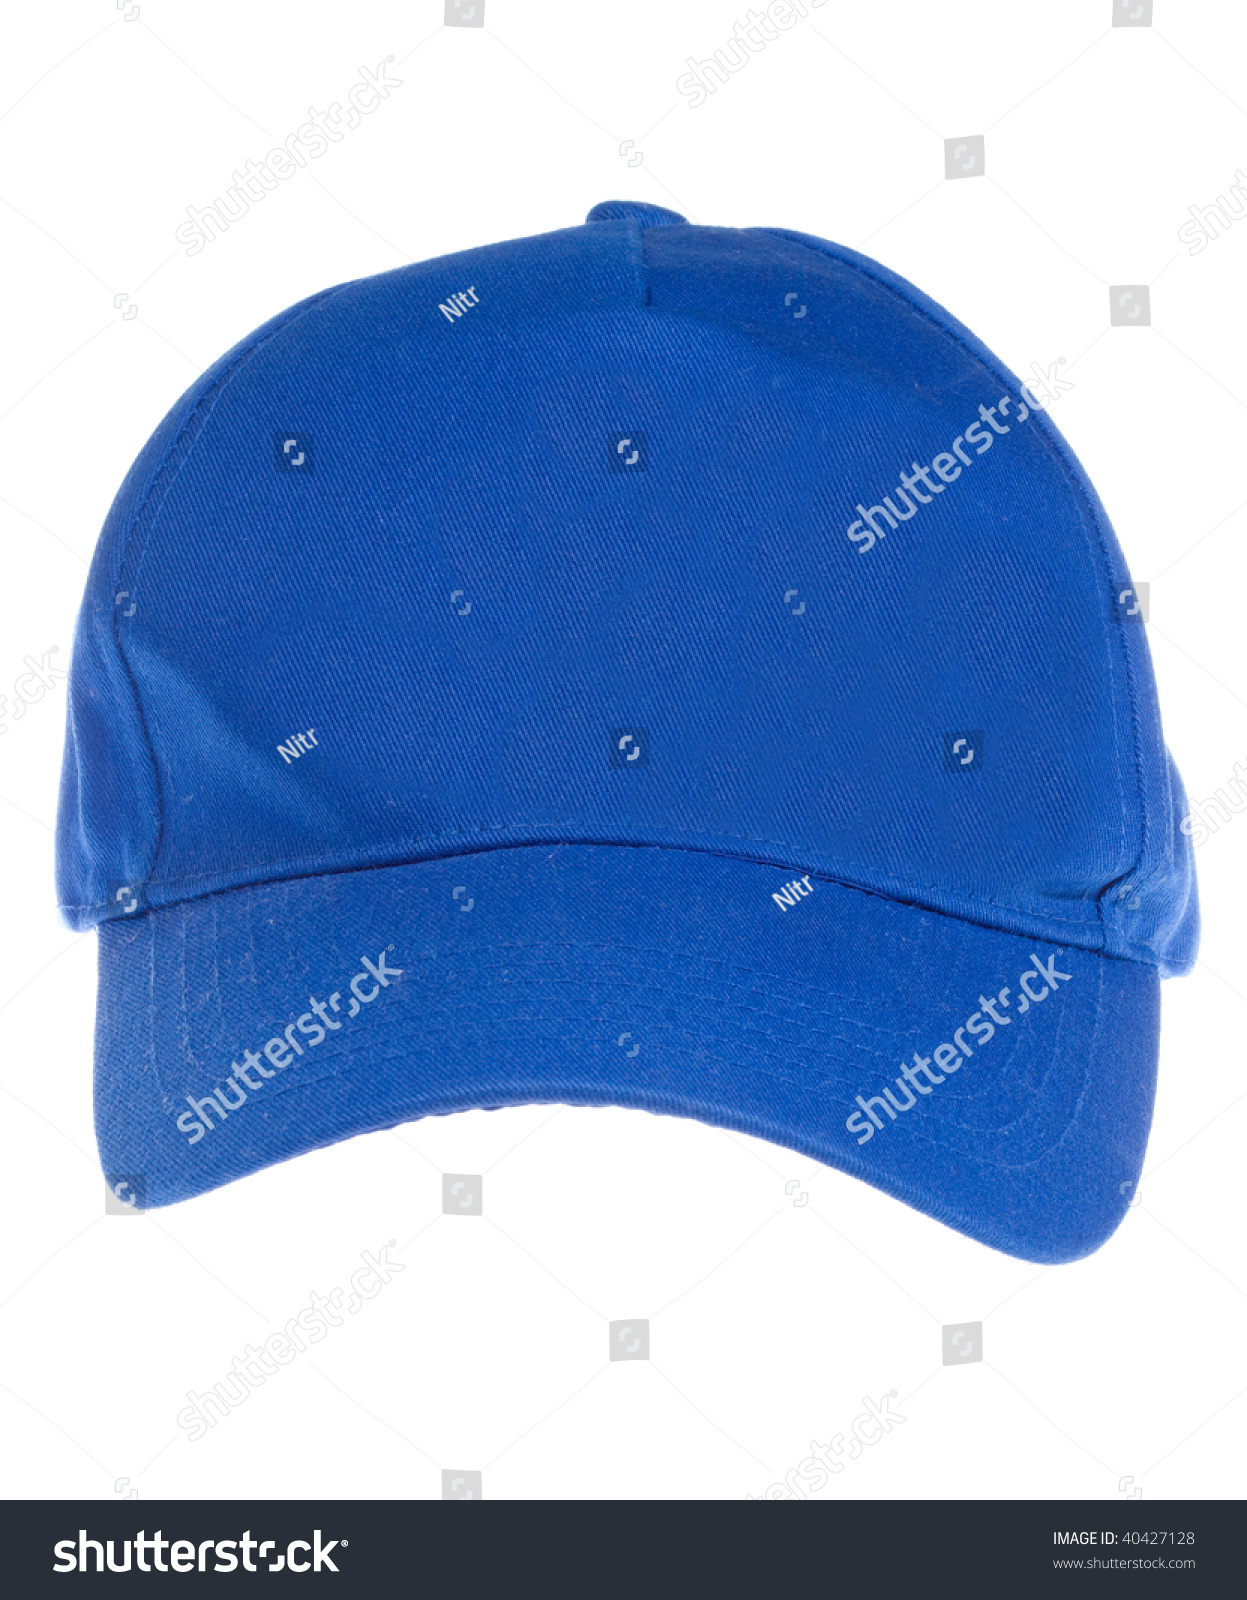 Blue Cap Isolated On White Background Stock Photo 40427128 : Shutterstock